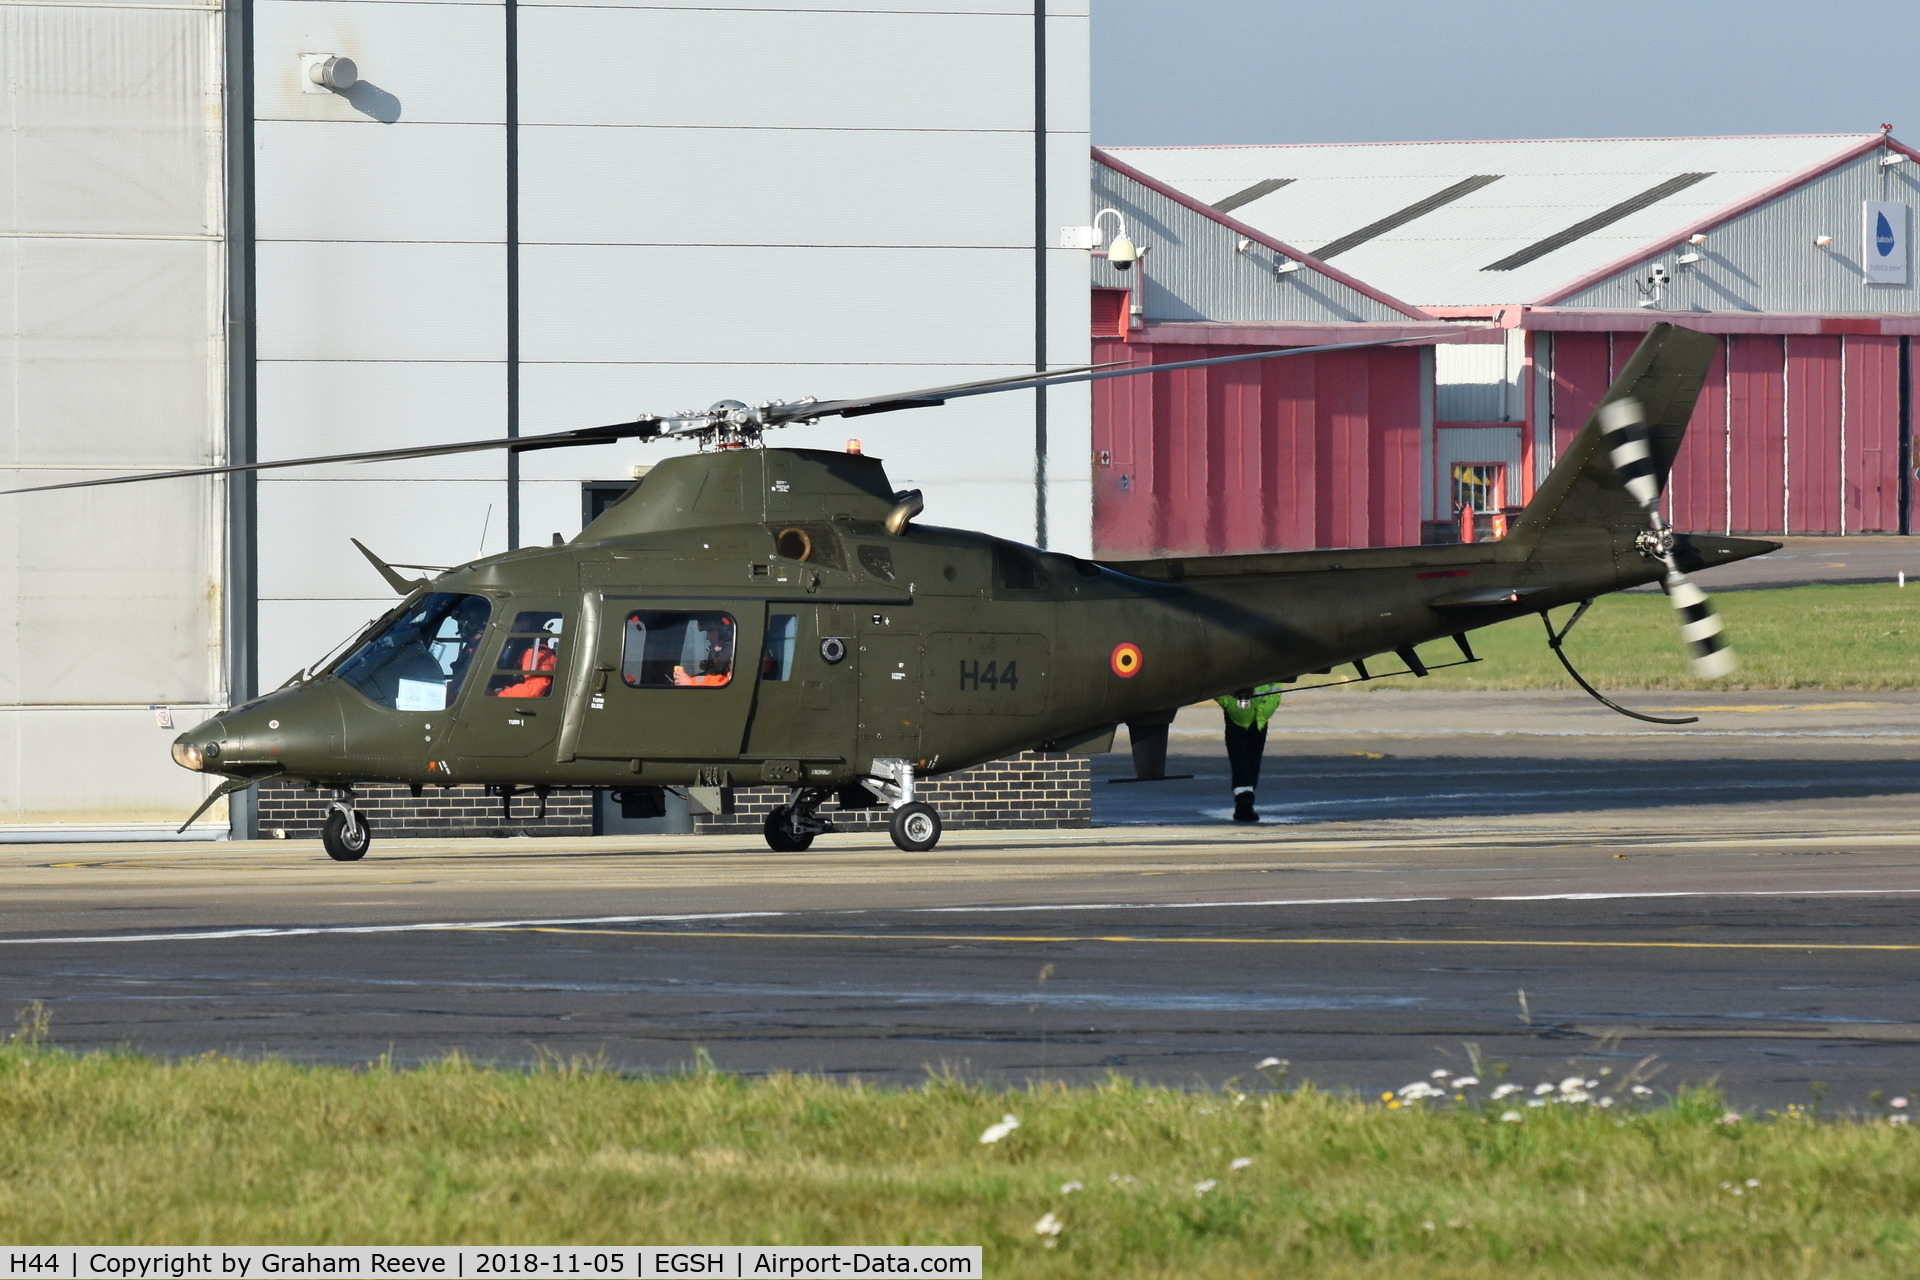 H44, Agusta A-109BA C/N 0344, One of three Belgian Army A-109's visiting Norwich along with a NH90.